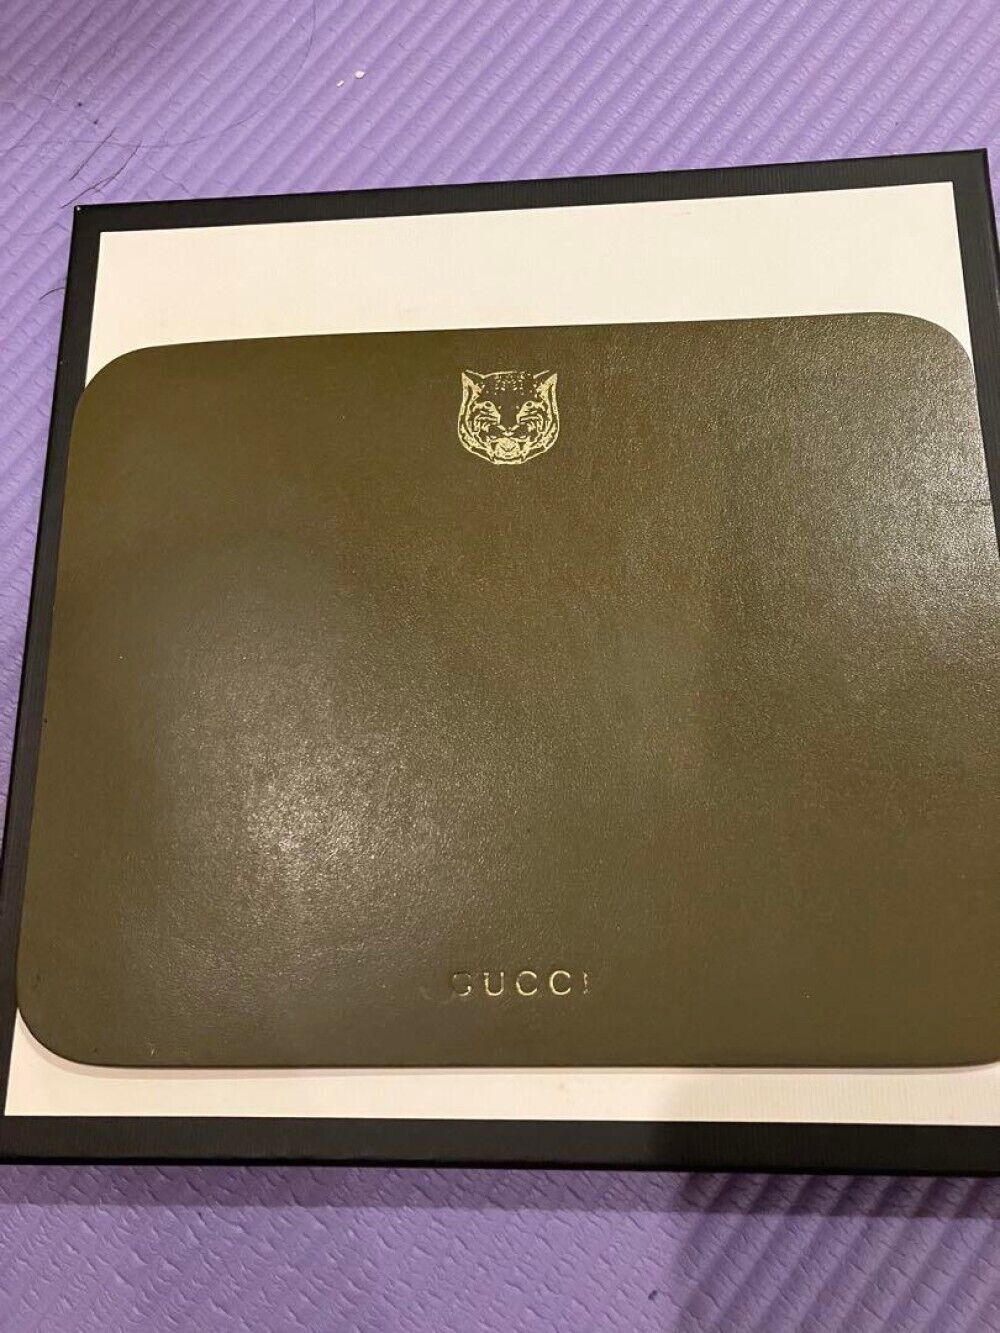 GUCCI Office Supplies Taiga Tiger Mouse Pad Leather Khaki Novelty